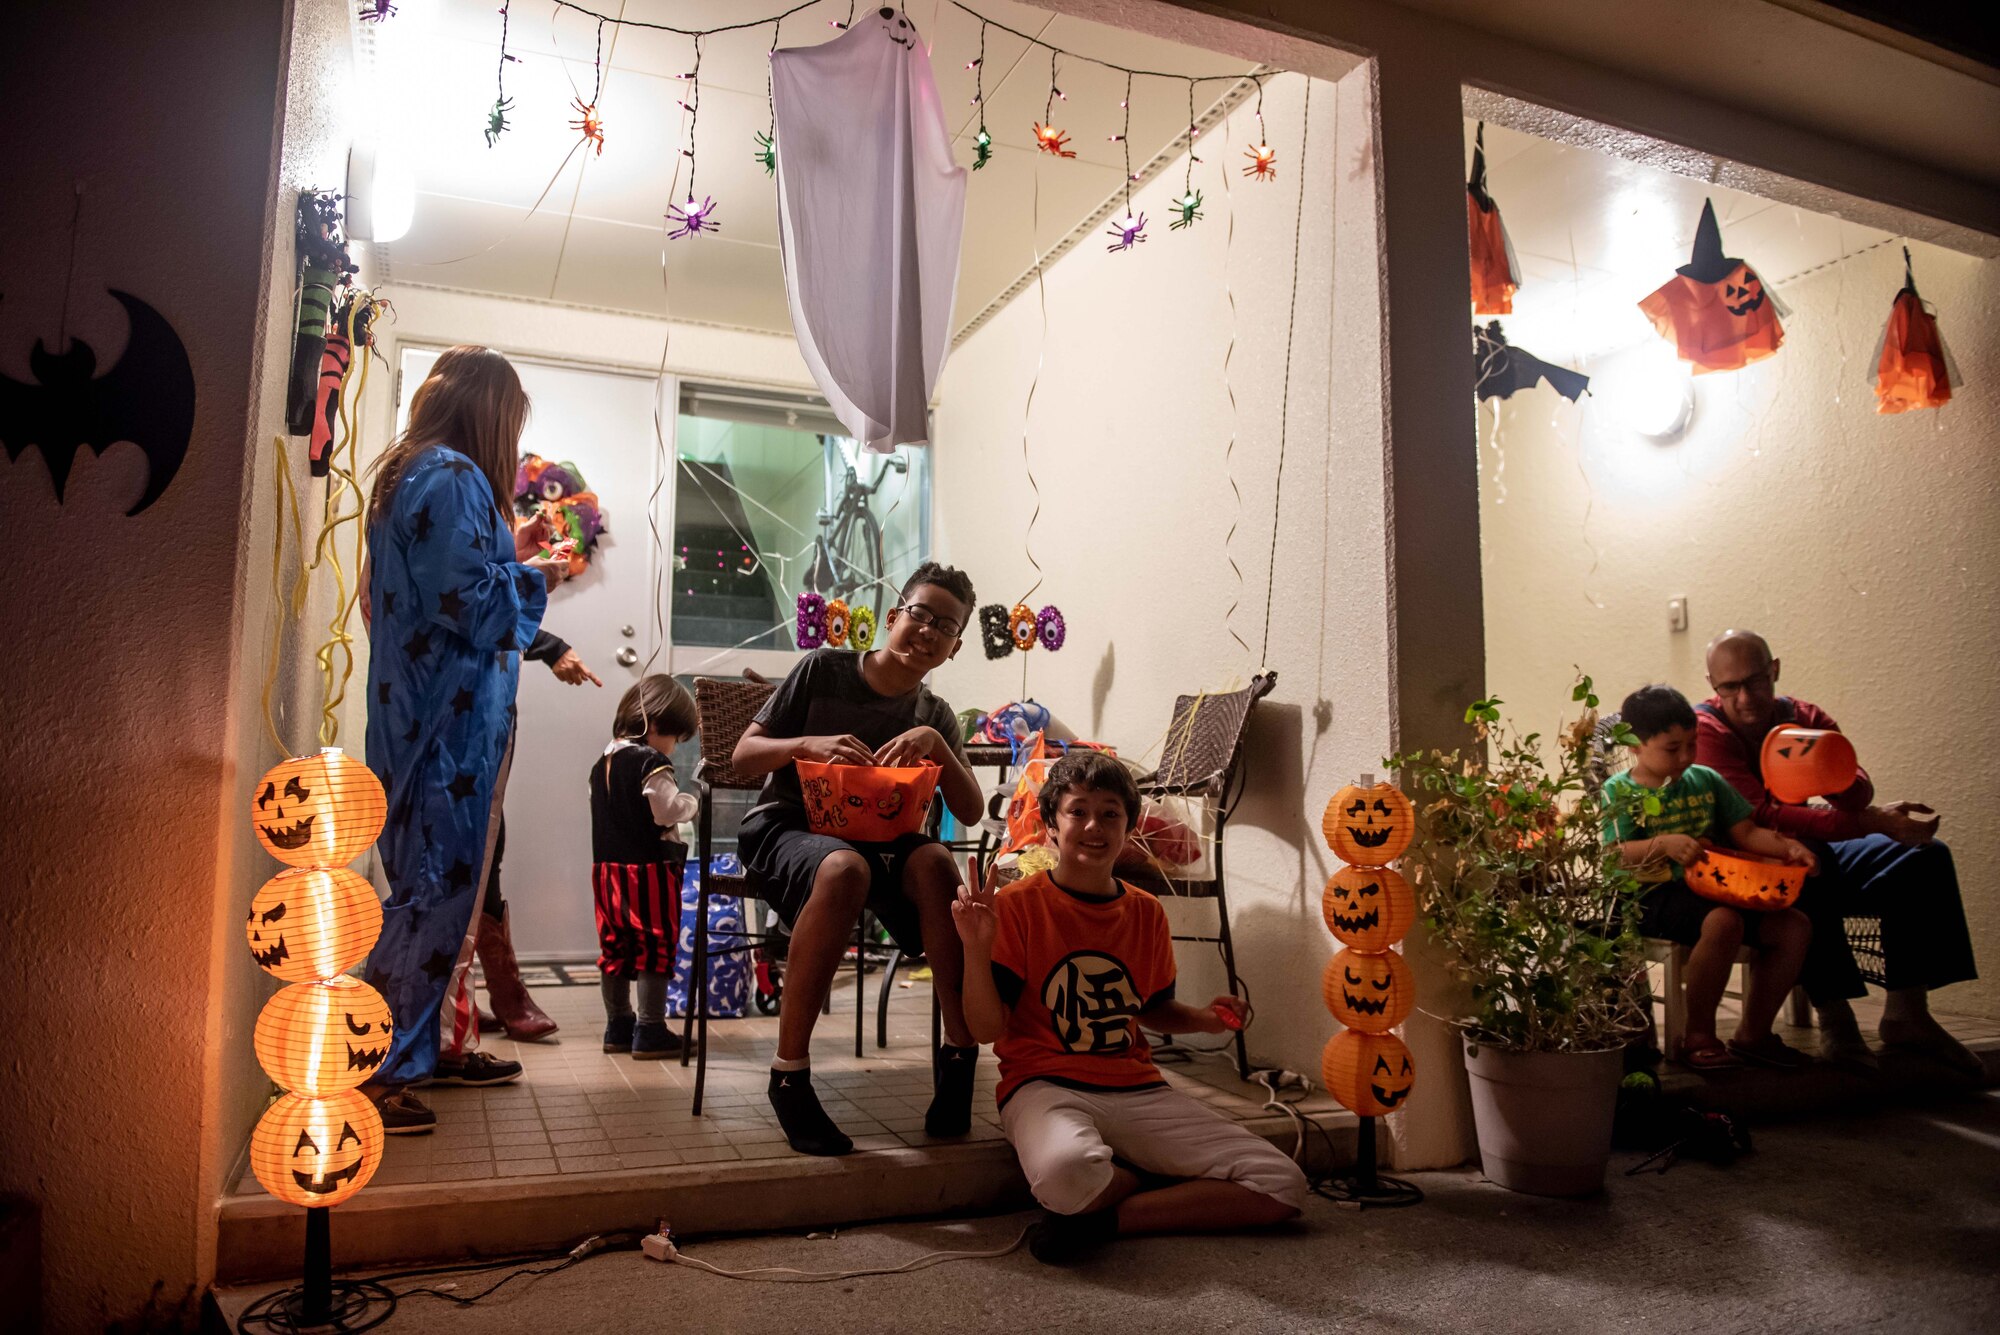 Team Kadena welcomed over 200 local community members and participated in trick-or-treating with them